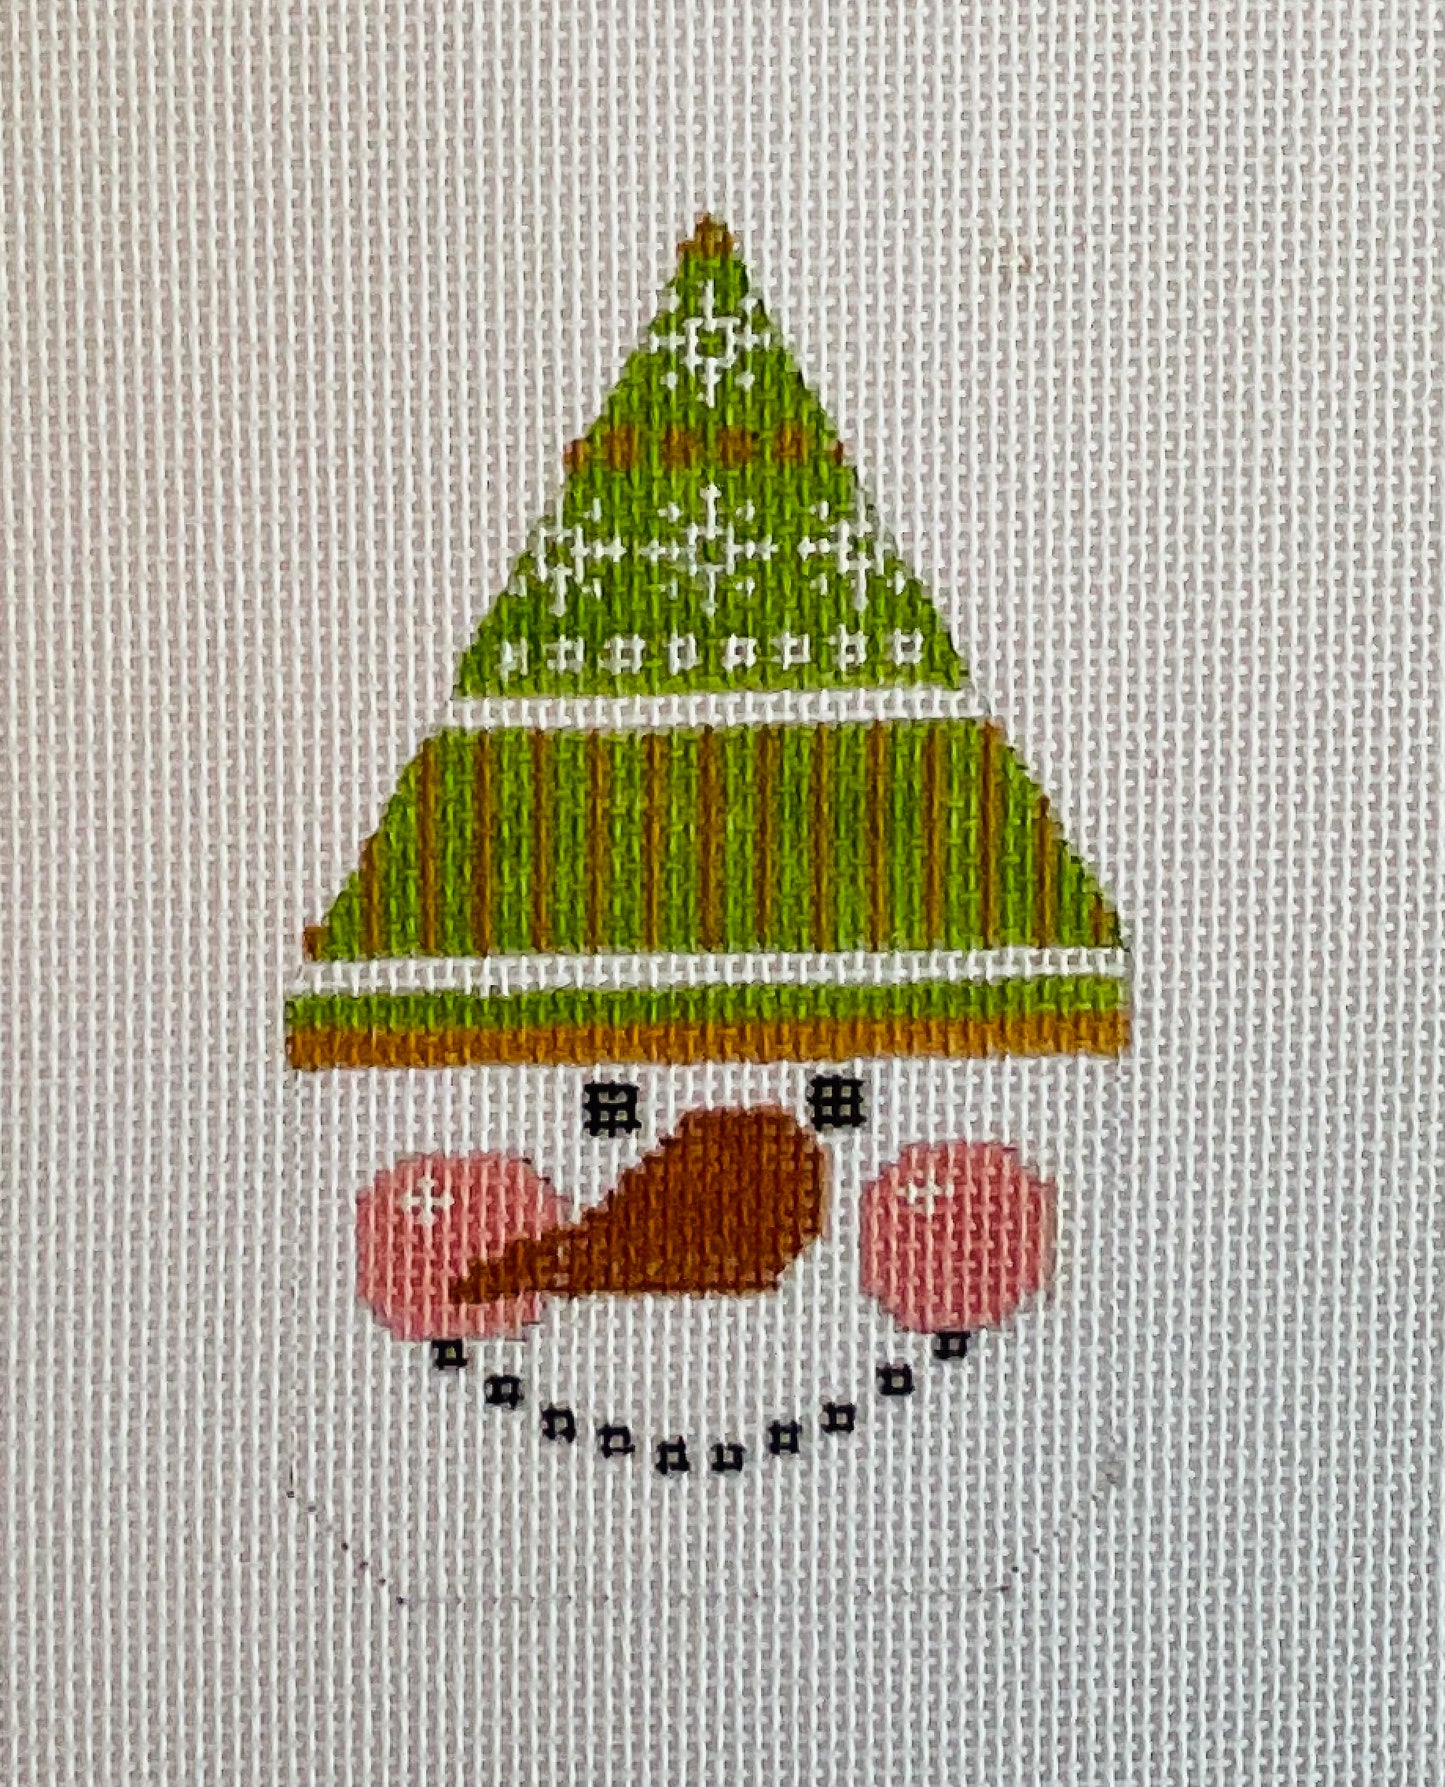 Snowman Peach/Green Hat with Snowflakes